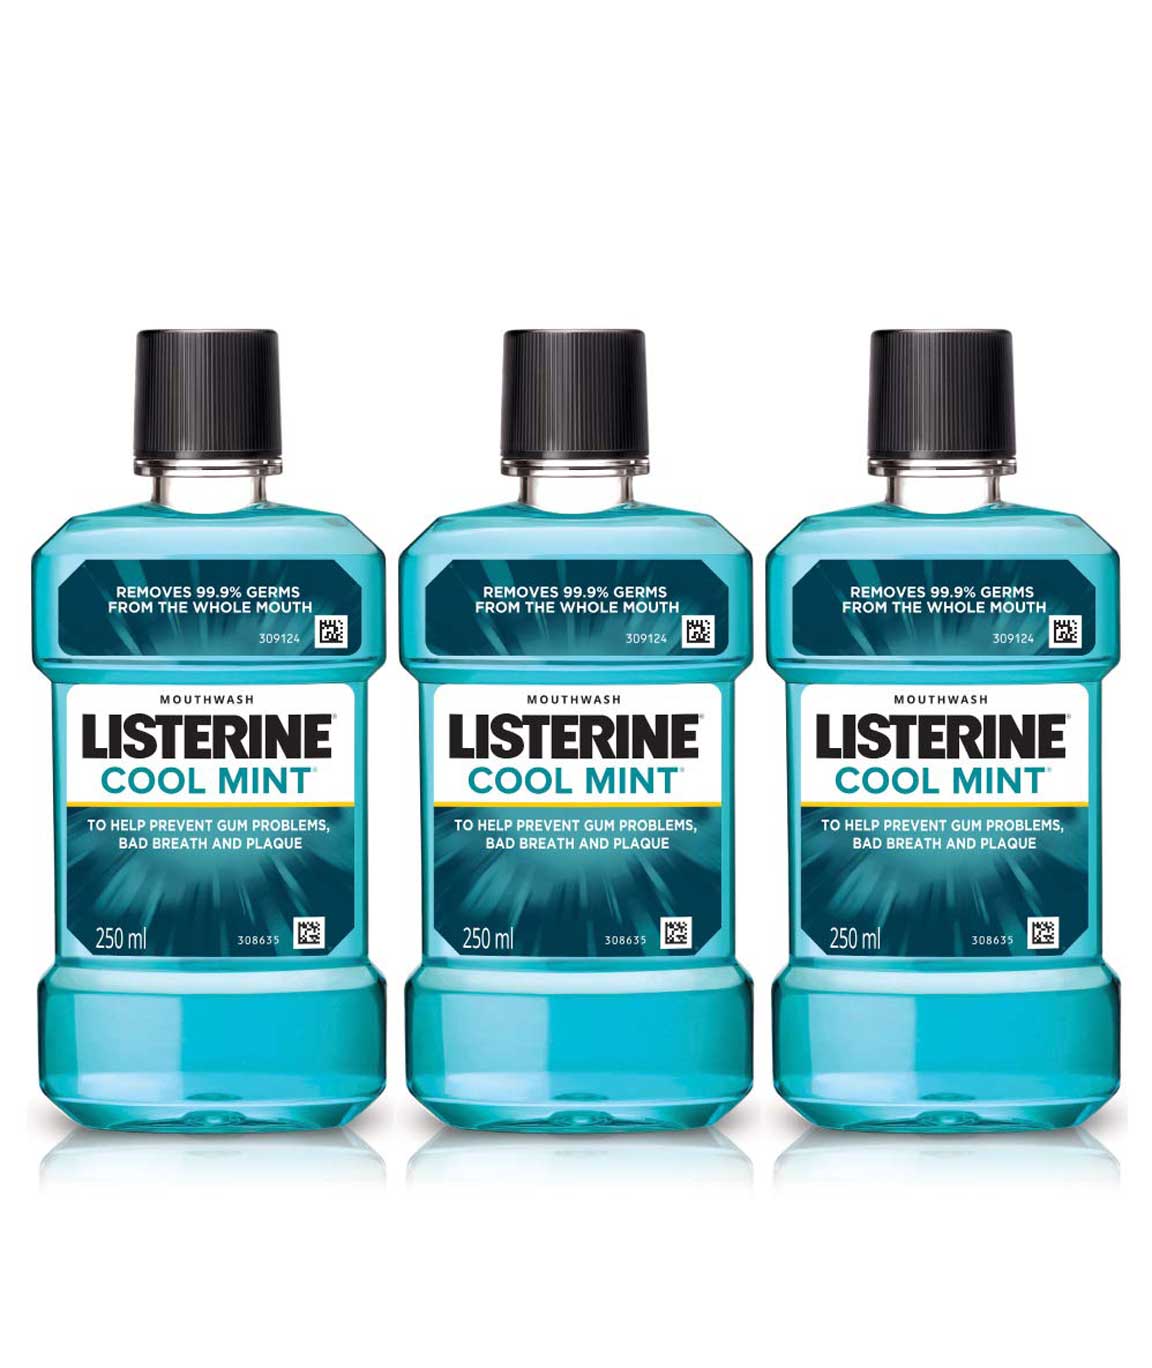 Listerine Cool Mint Mouthwash 250ml (Buy 2 Get 1 Free)